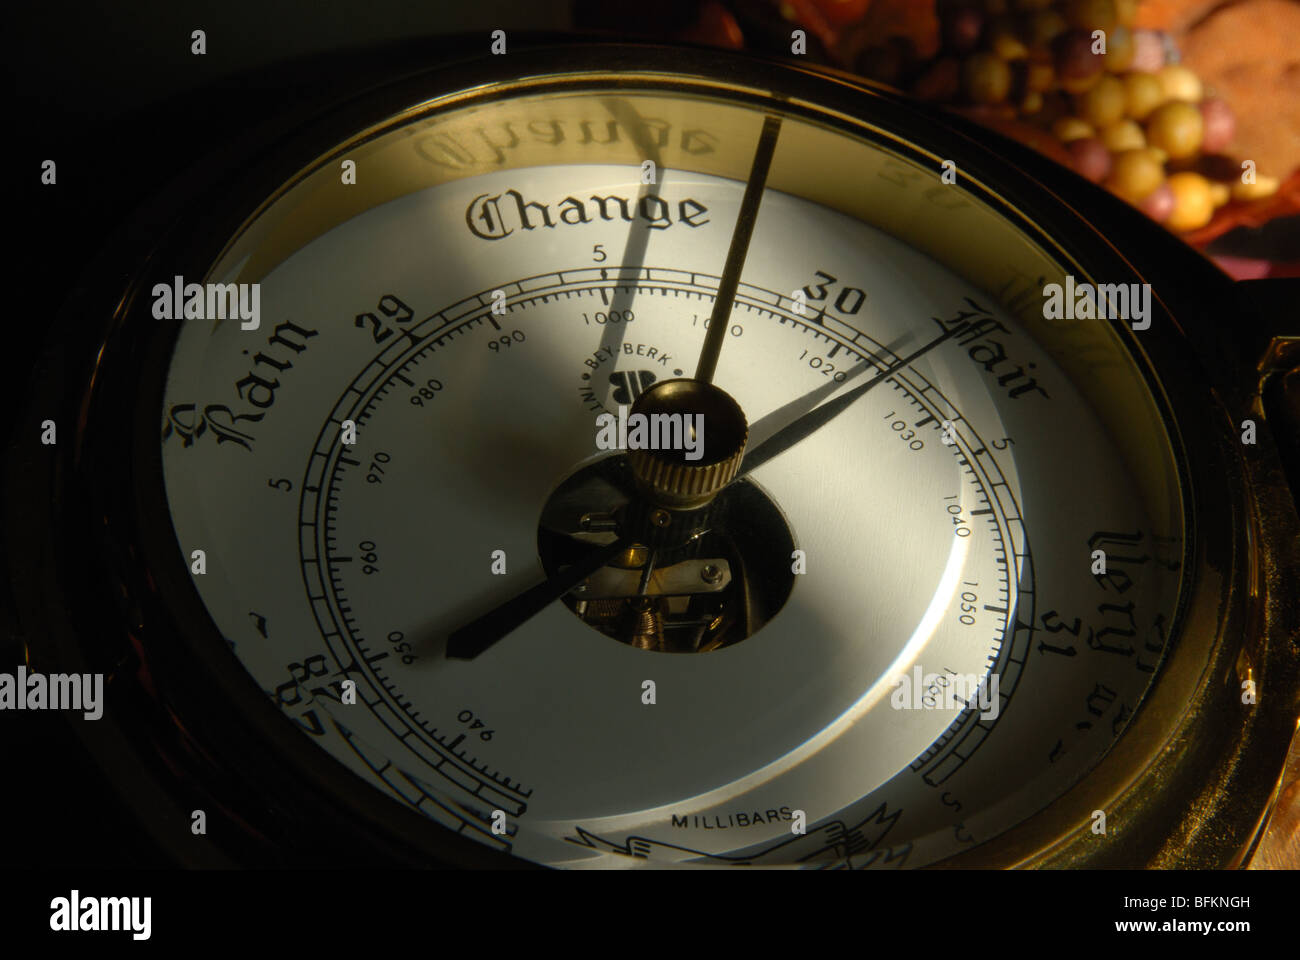 https://c8.alamy.com/comp/BFKNGH/the-dial-and-face-of-an-aneroid-barometer-BFKNGH.jpg